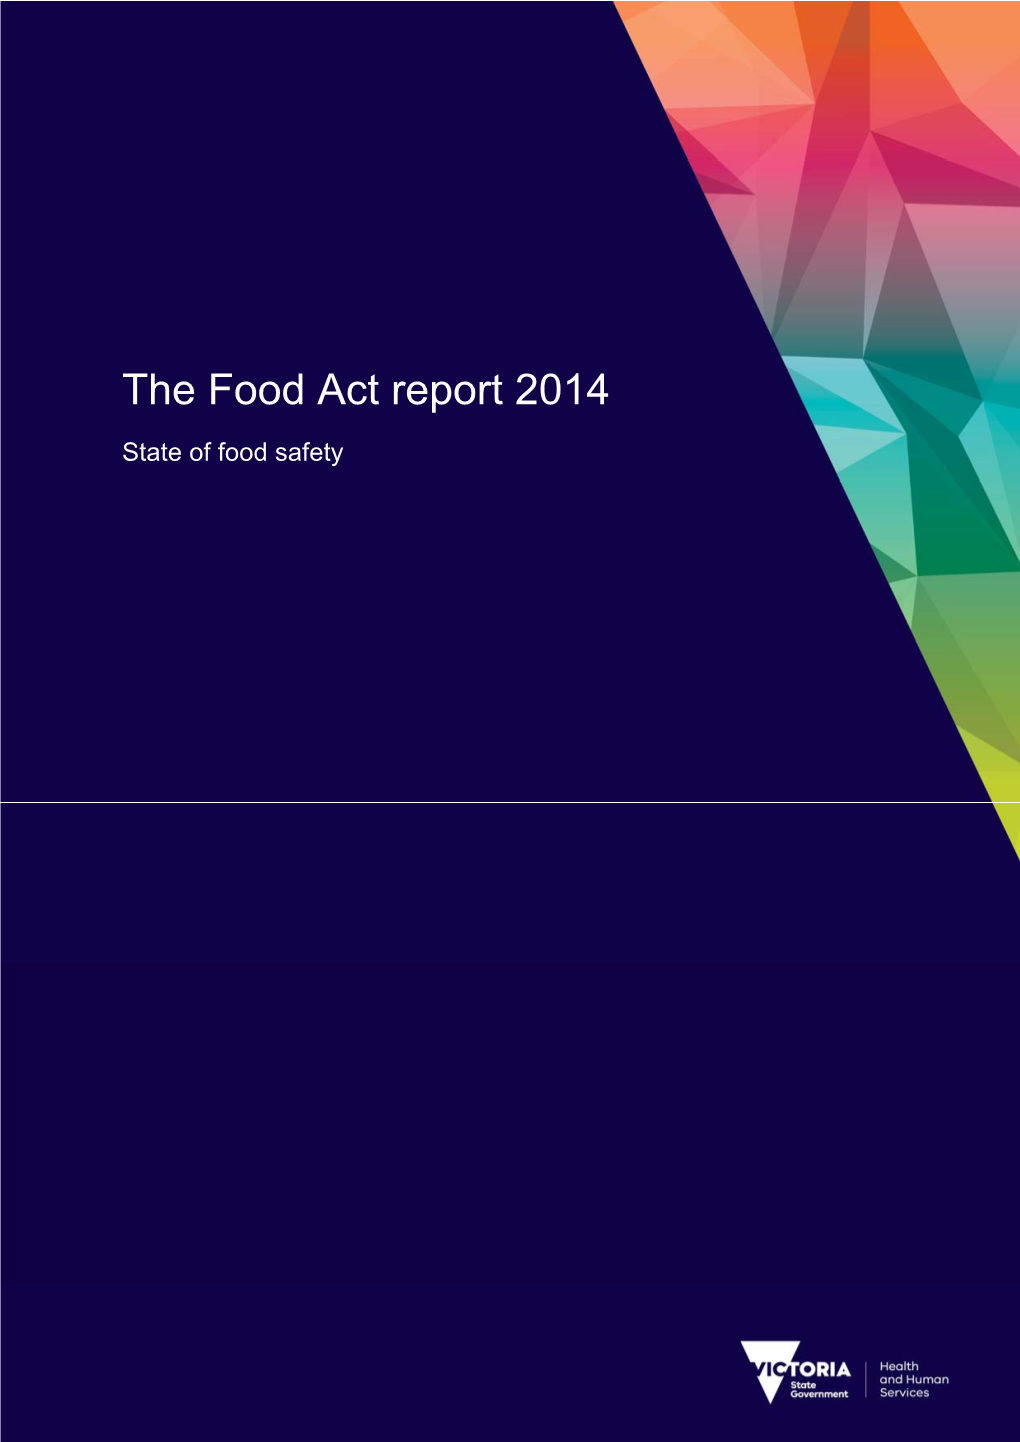 The Food Act Report 2014